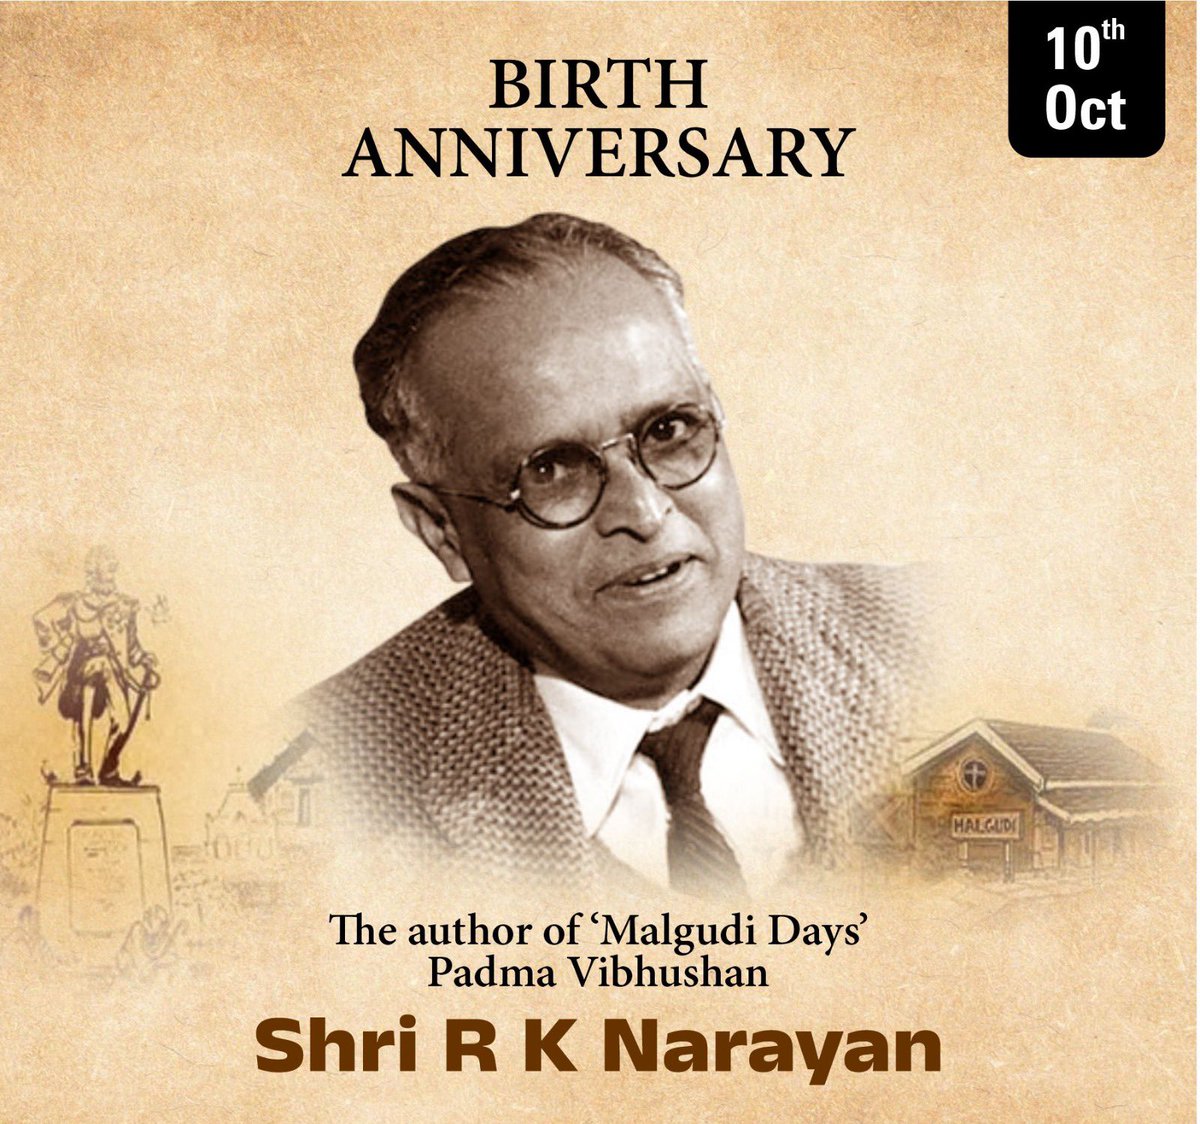 Padma Vibhushan Shri R. K. Narayan has a special place in the hearts of every literature enthusiast. His works continue to amuse and entertain people. My tribute to him on his birth anniversary

#RKNarayan